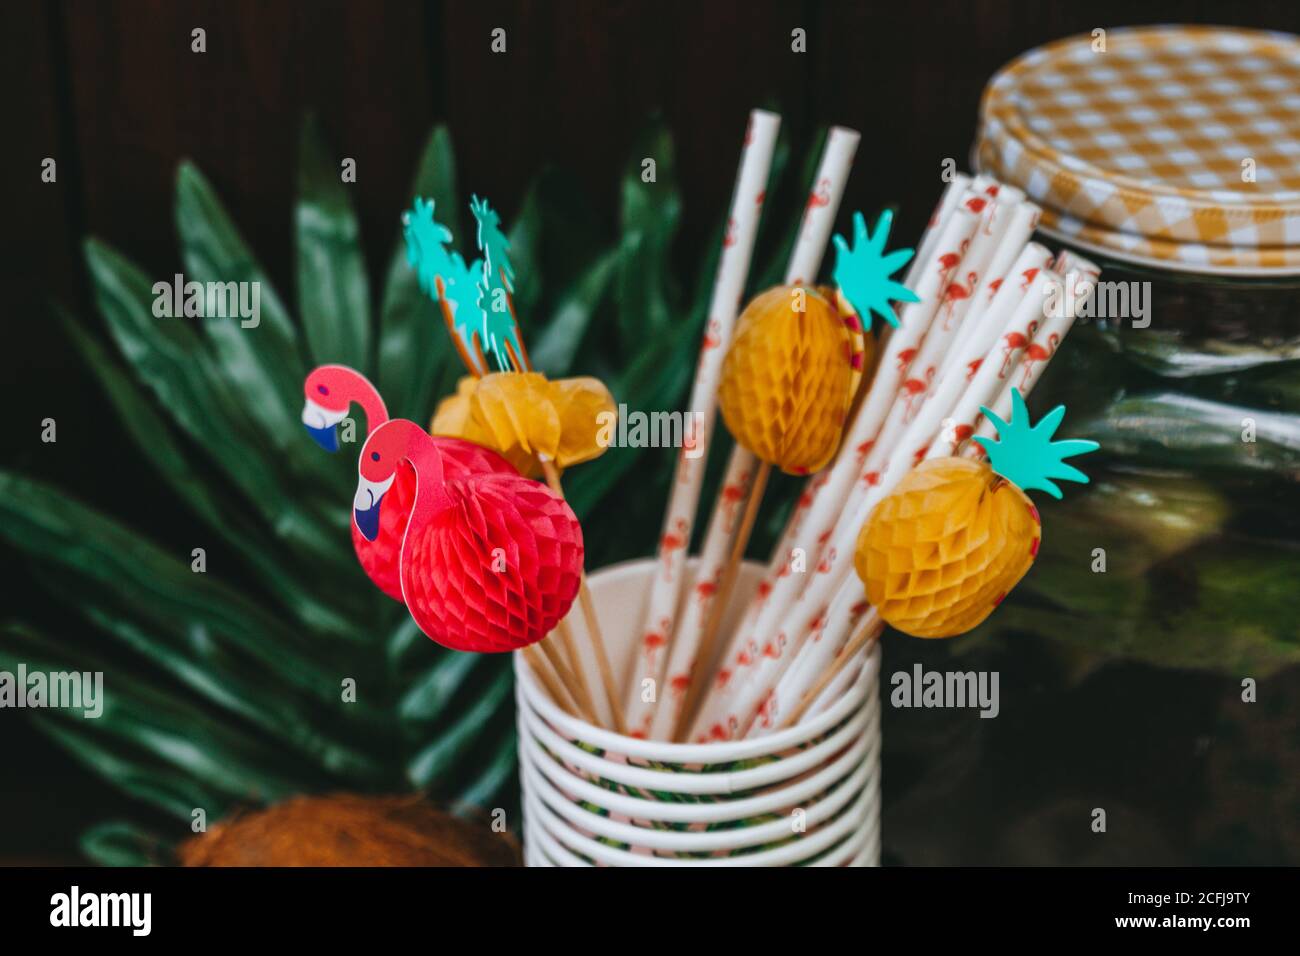 Tropical party decorations. Colorful paper pom poms, tropical themed party. Garden party. Stock Photo